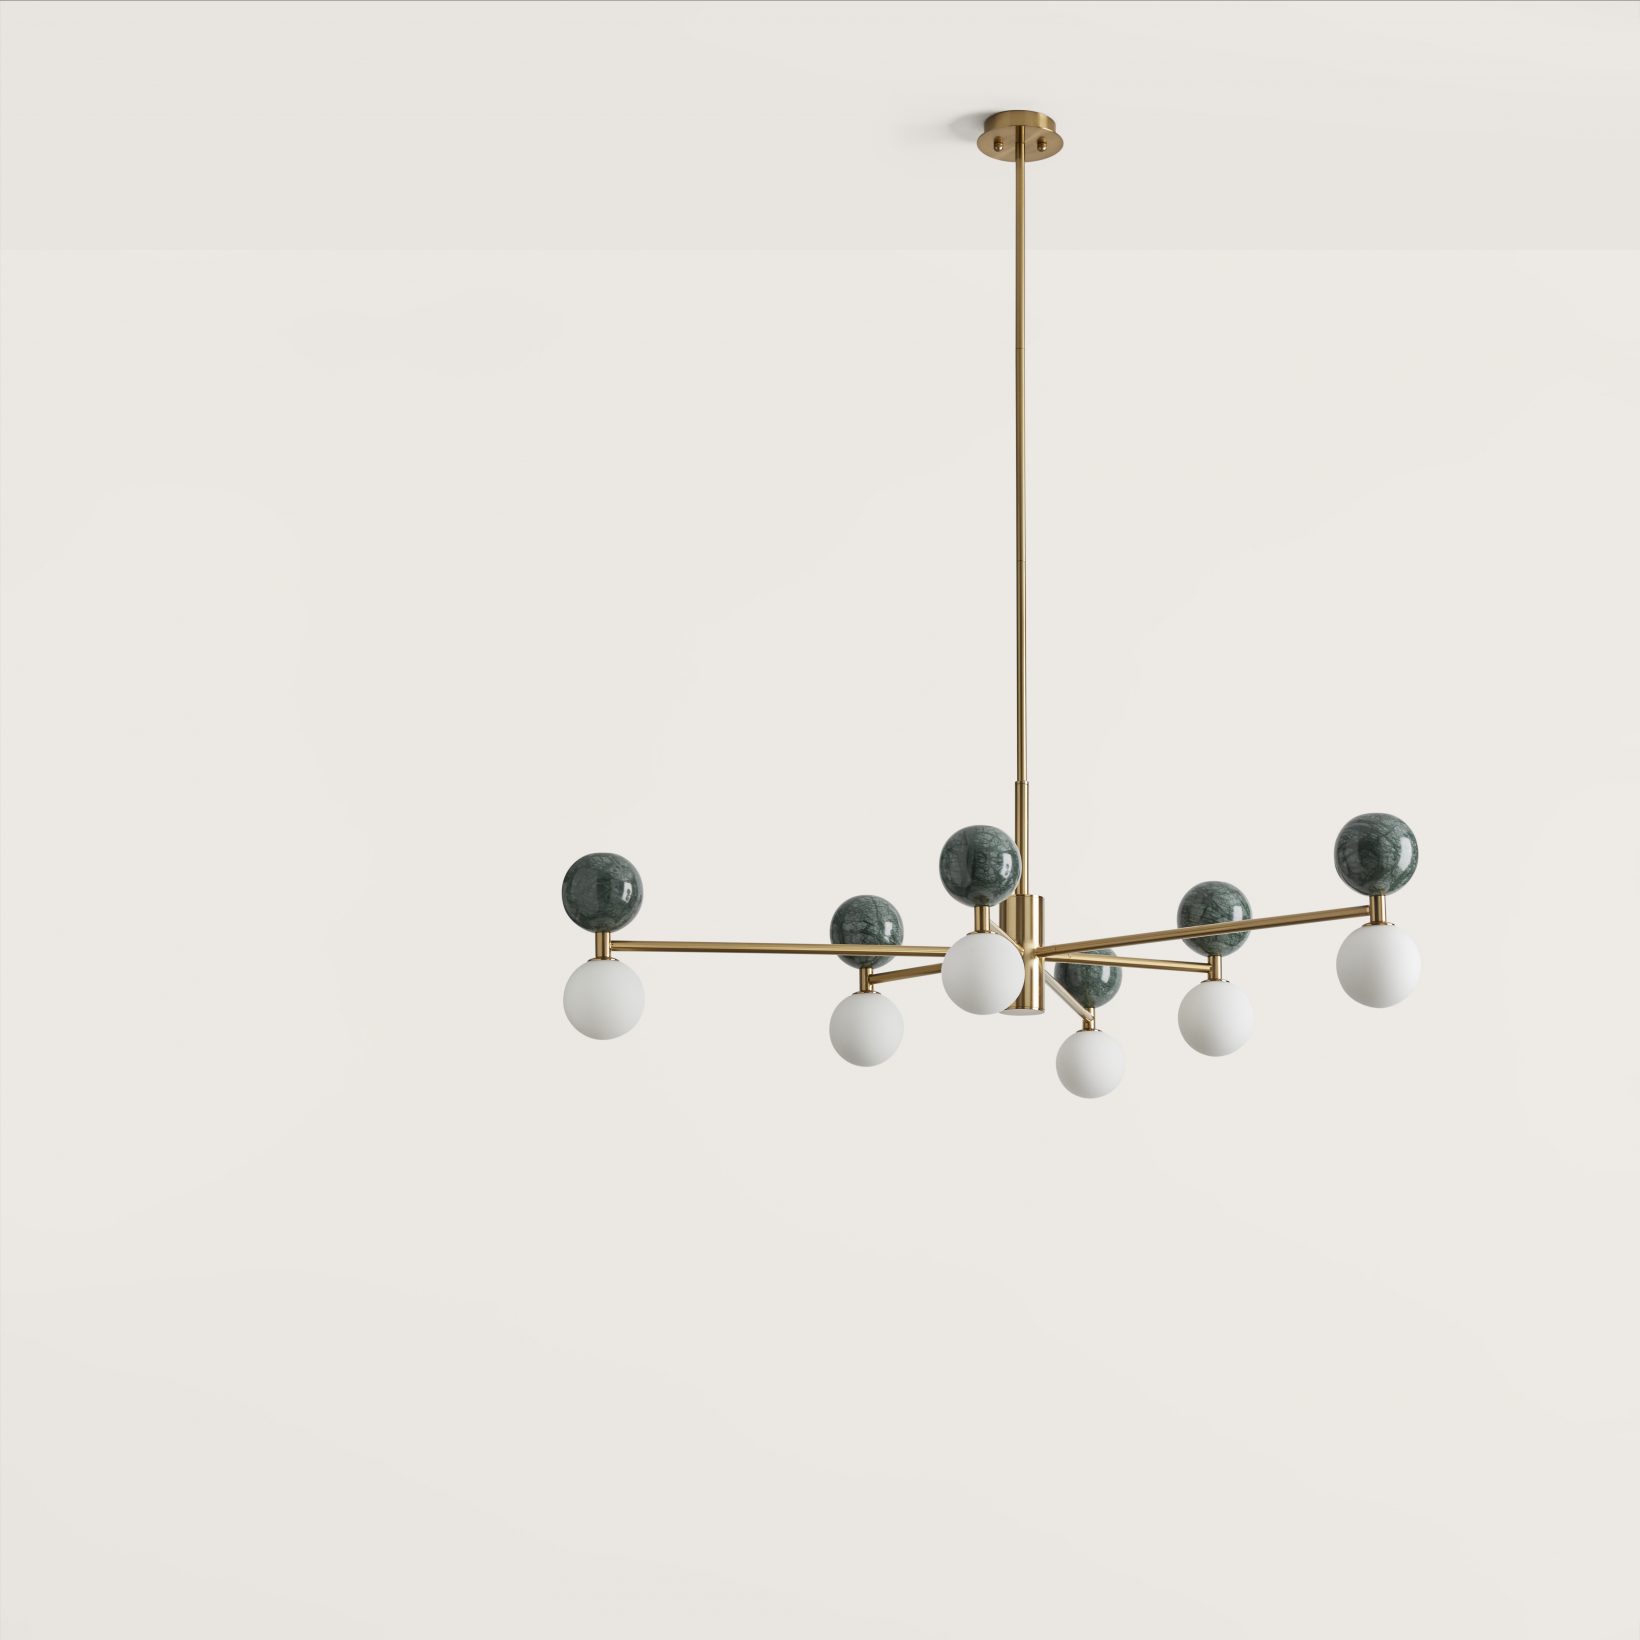 Aromas Dalt Pendant Light by Olson and Baker - Designer & Contemporary Sofas, Furniture - Olson and Baker showcases original designs from authentic, designer brands. Buy contemporary furniture, lighting, storage, sofas & chairs at Olson + Baker.